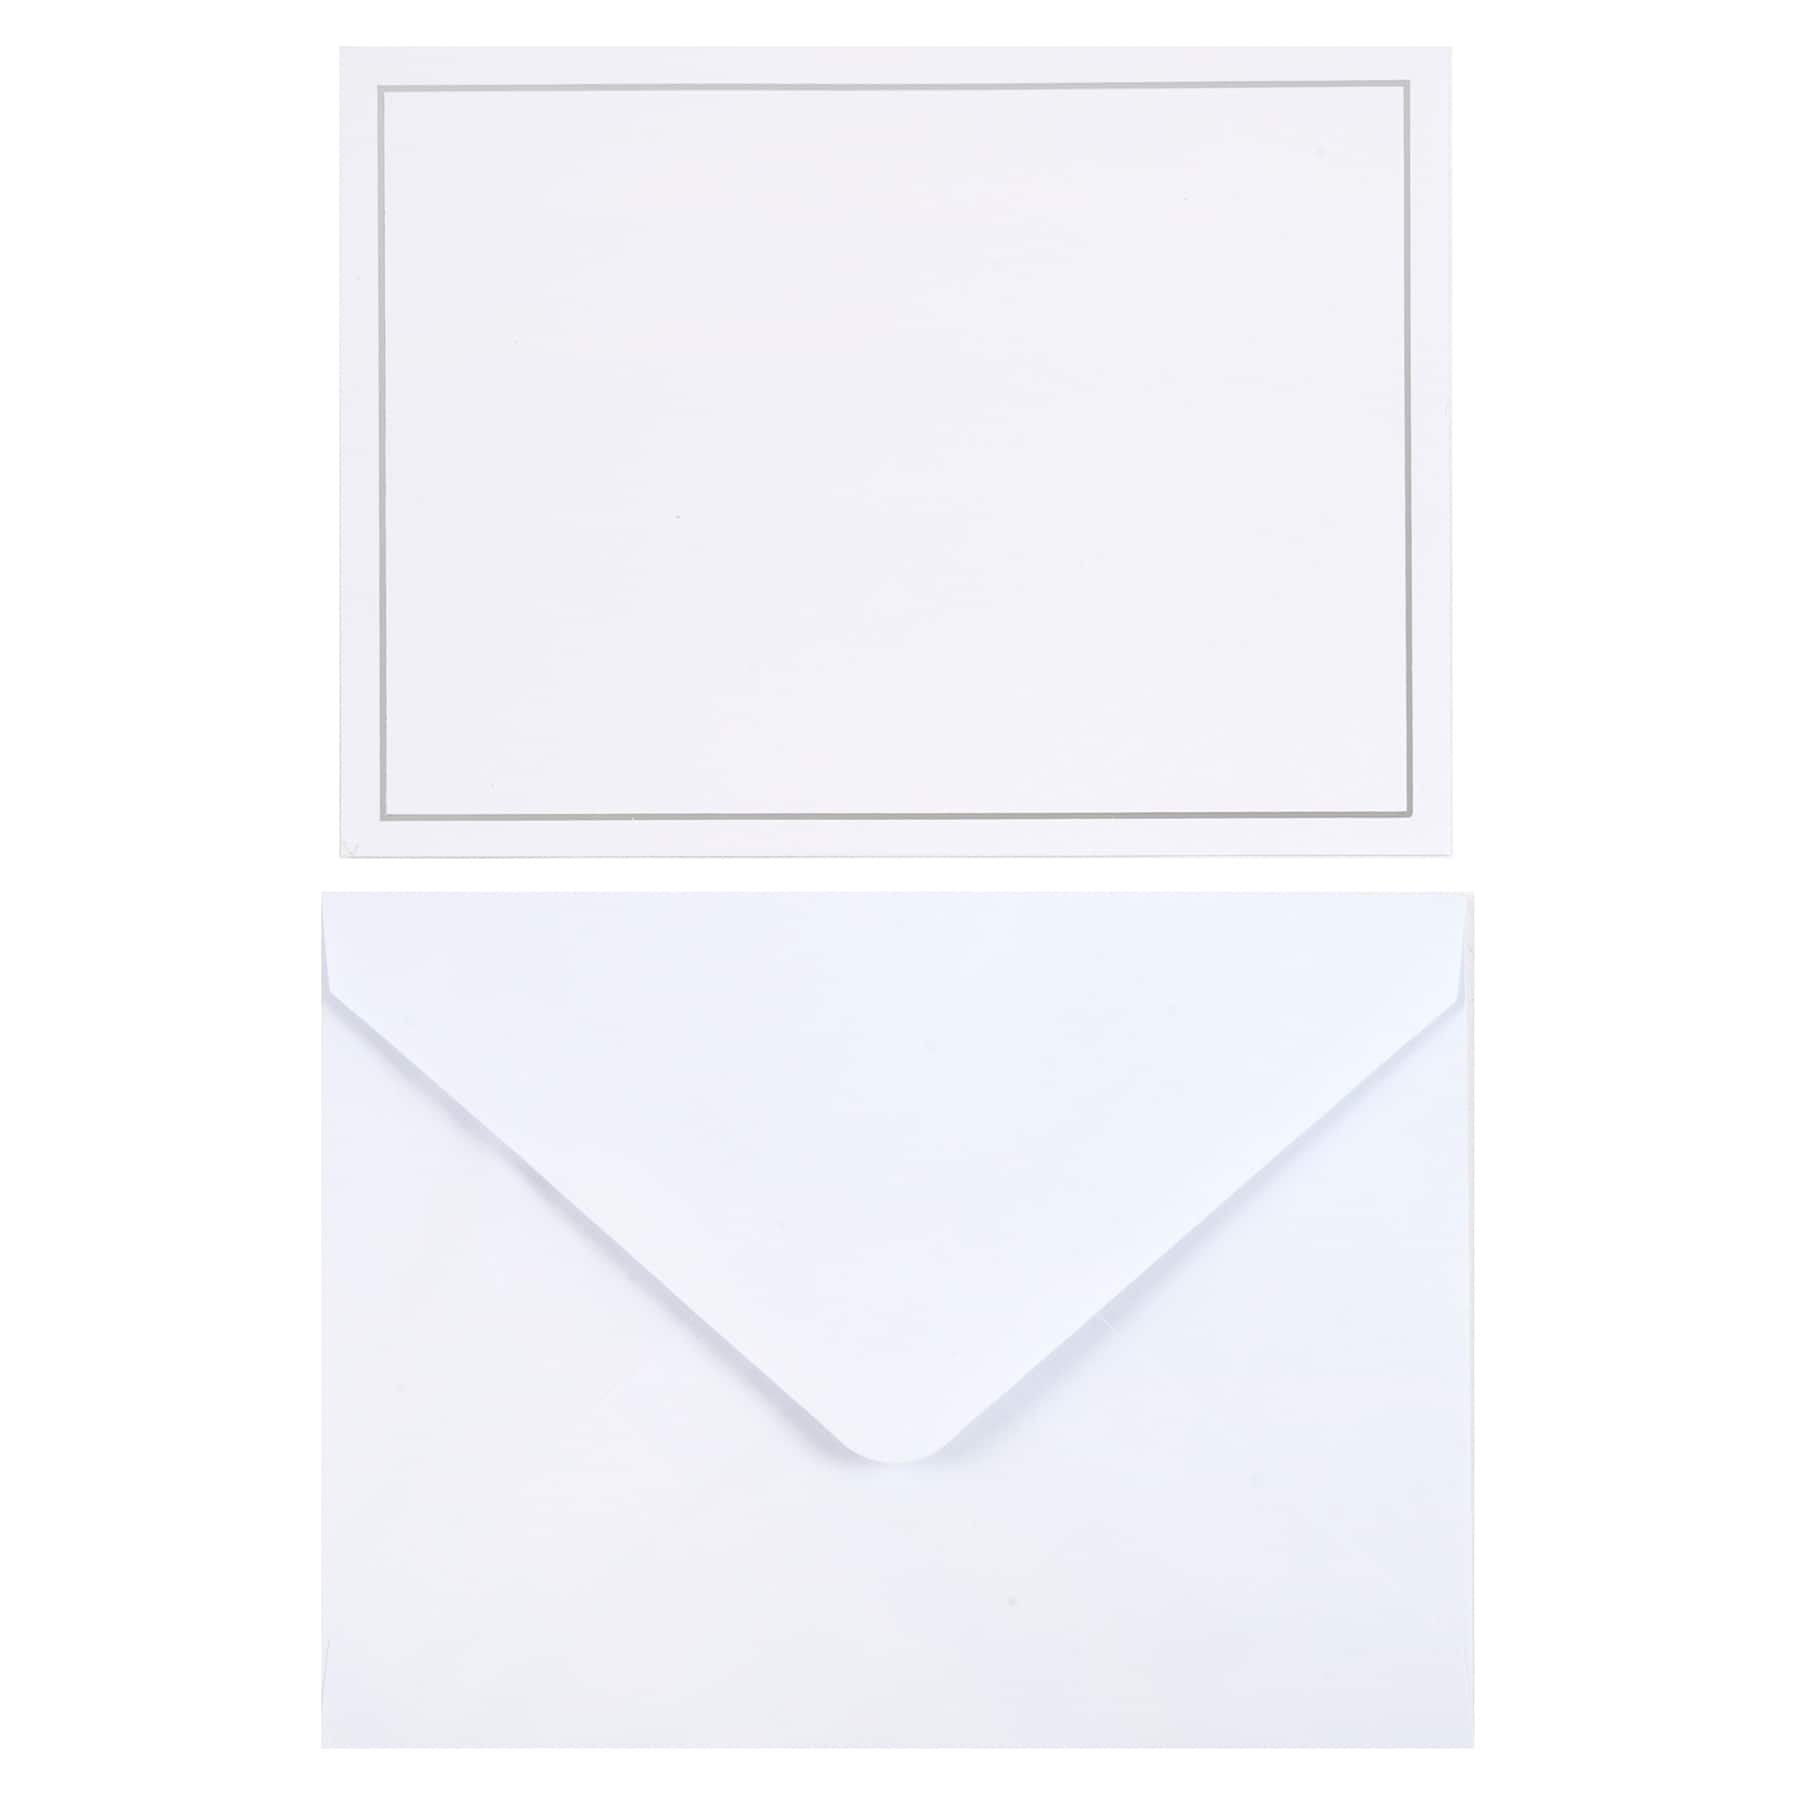 White Dove 8.5 x 11 Cardstock Paper by Recollections™, 100 Sheets